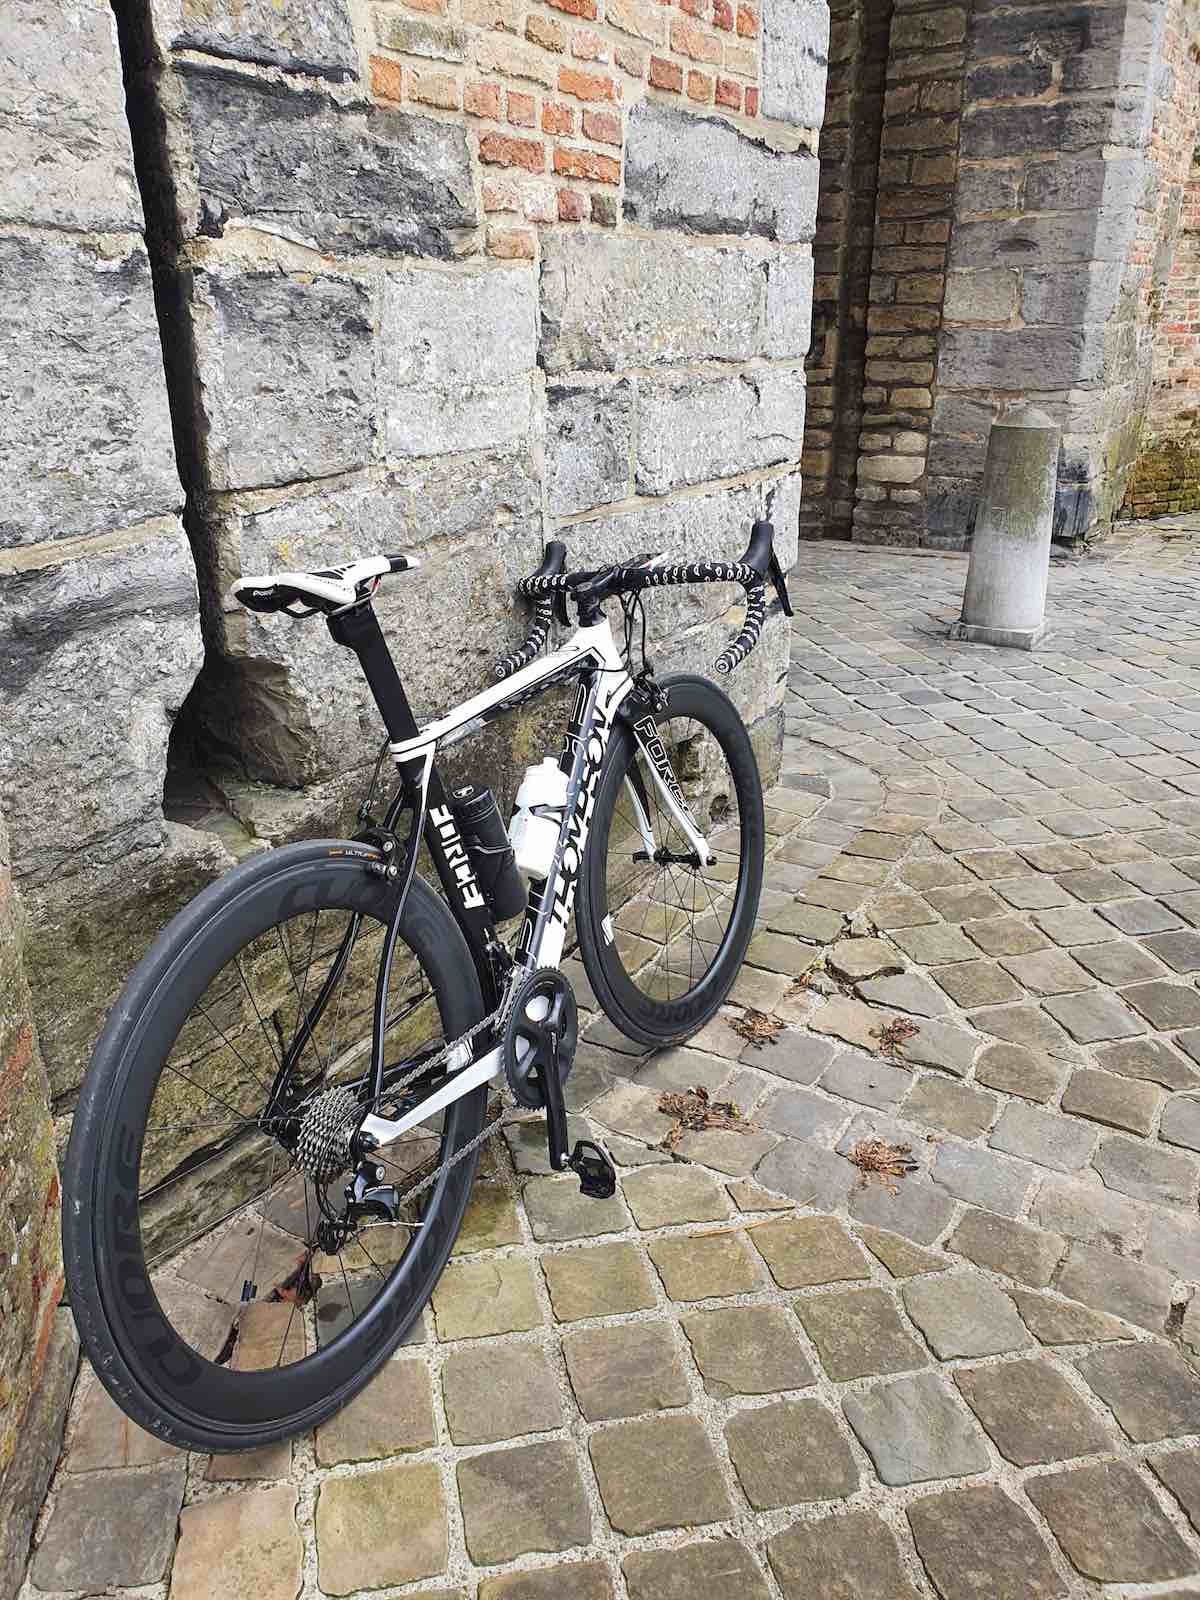 bikerumor pic of the day a bicycle leans against a stone wall and is surrounded by cobble stones in brugge, belgium.